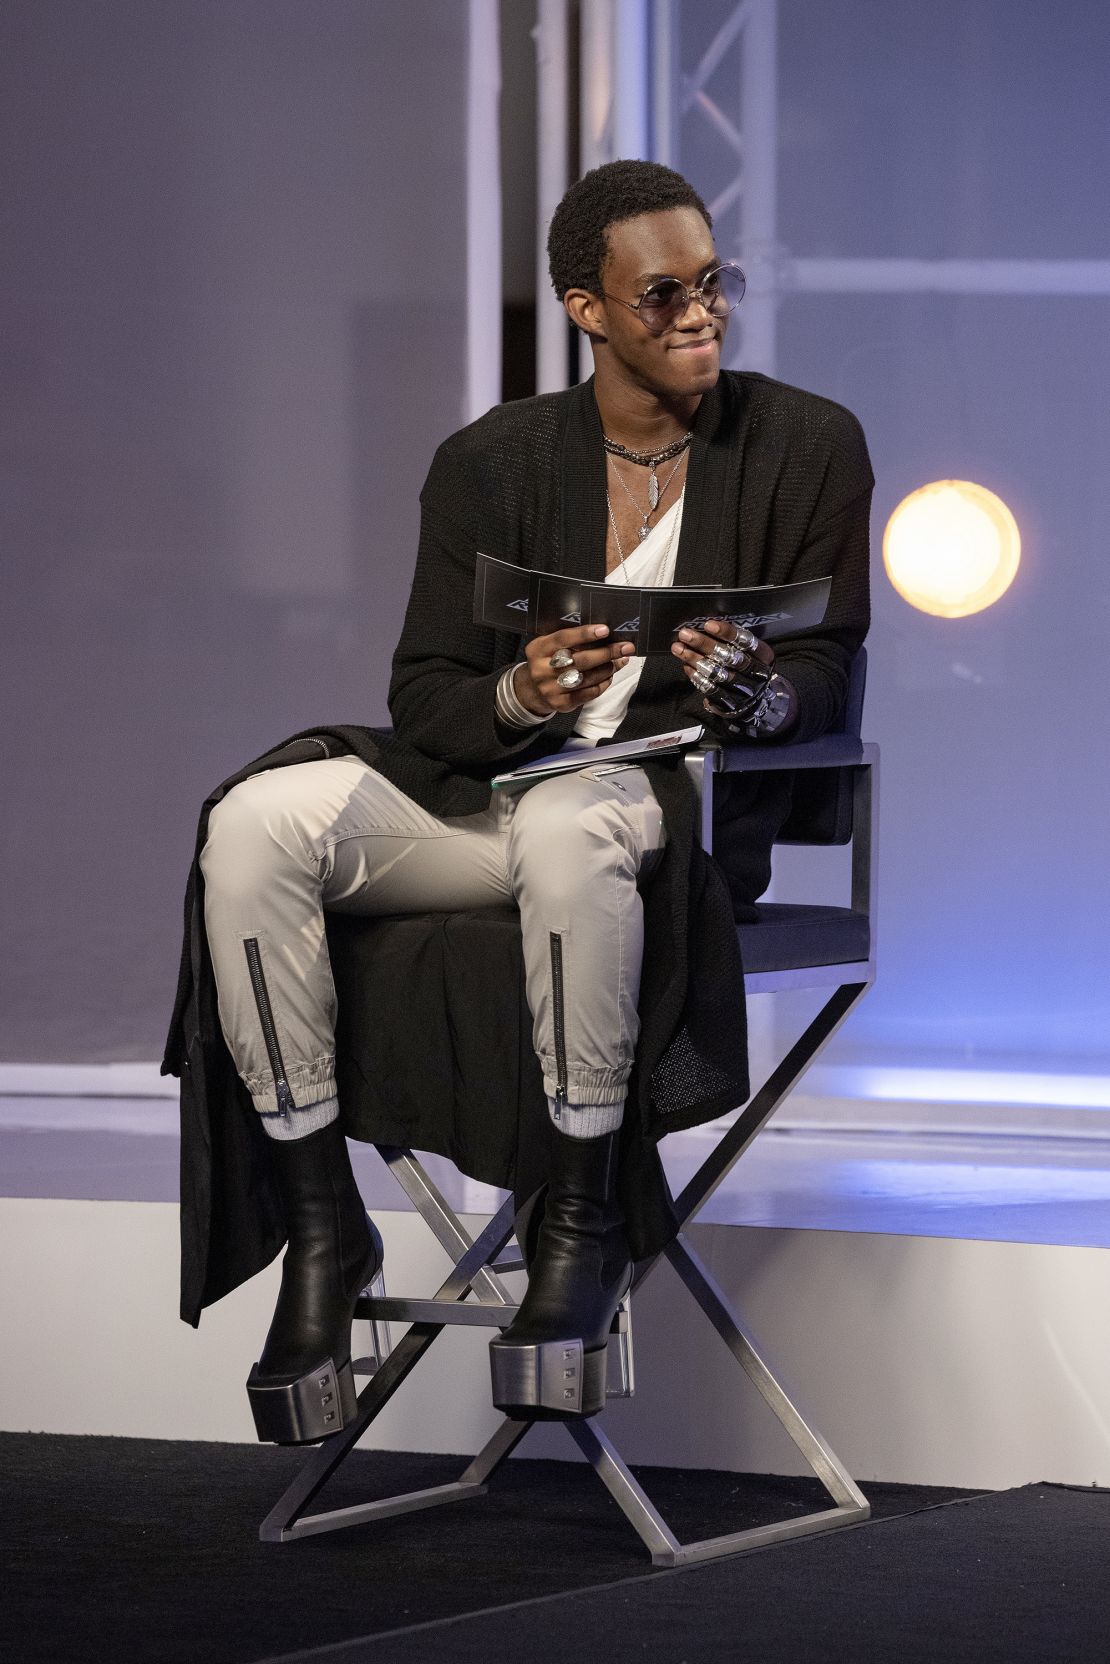 Model and TikTok star Wisdom Kaye wearing platform boots on an episode of "Project Runway."